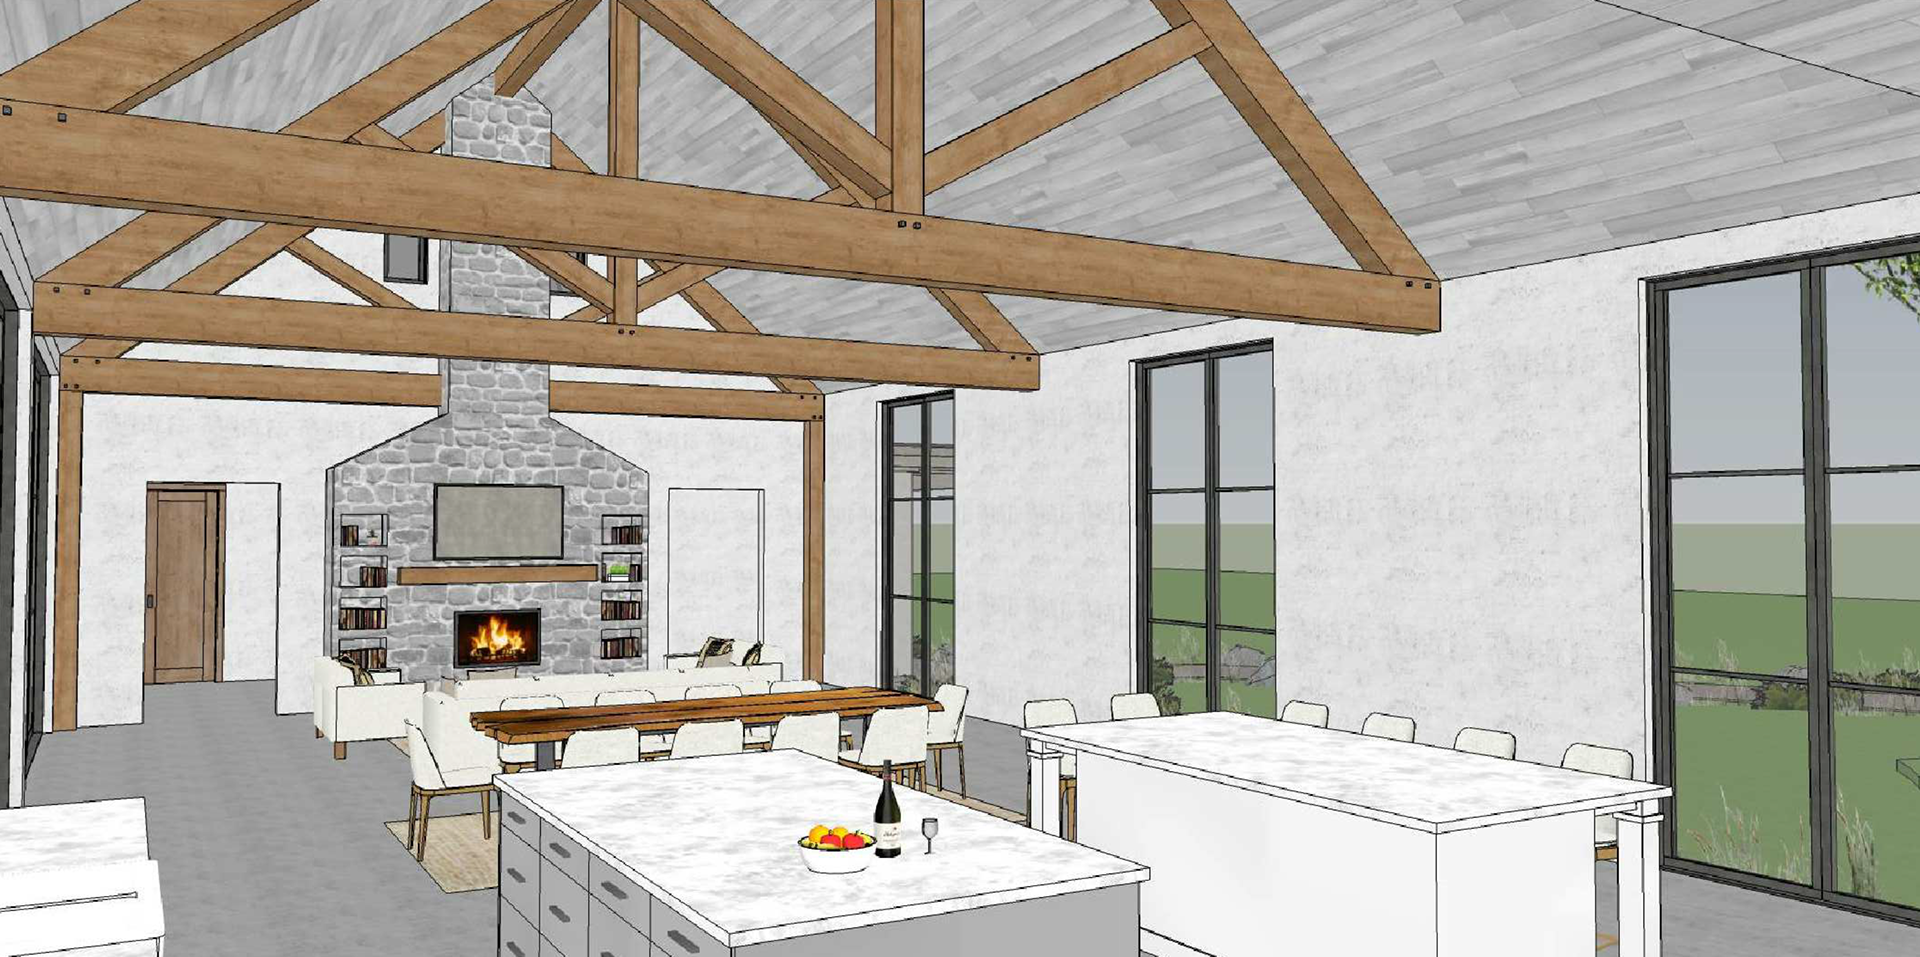 Rendering of a custom farm house design by Purcell